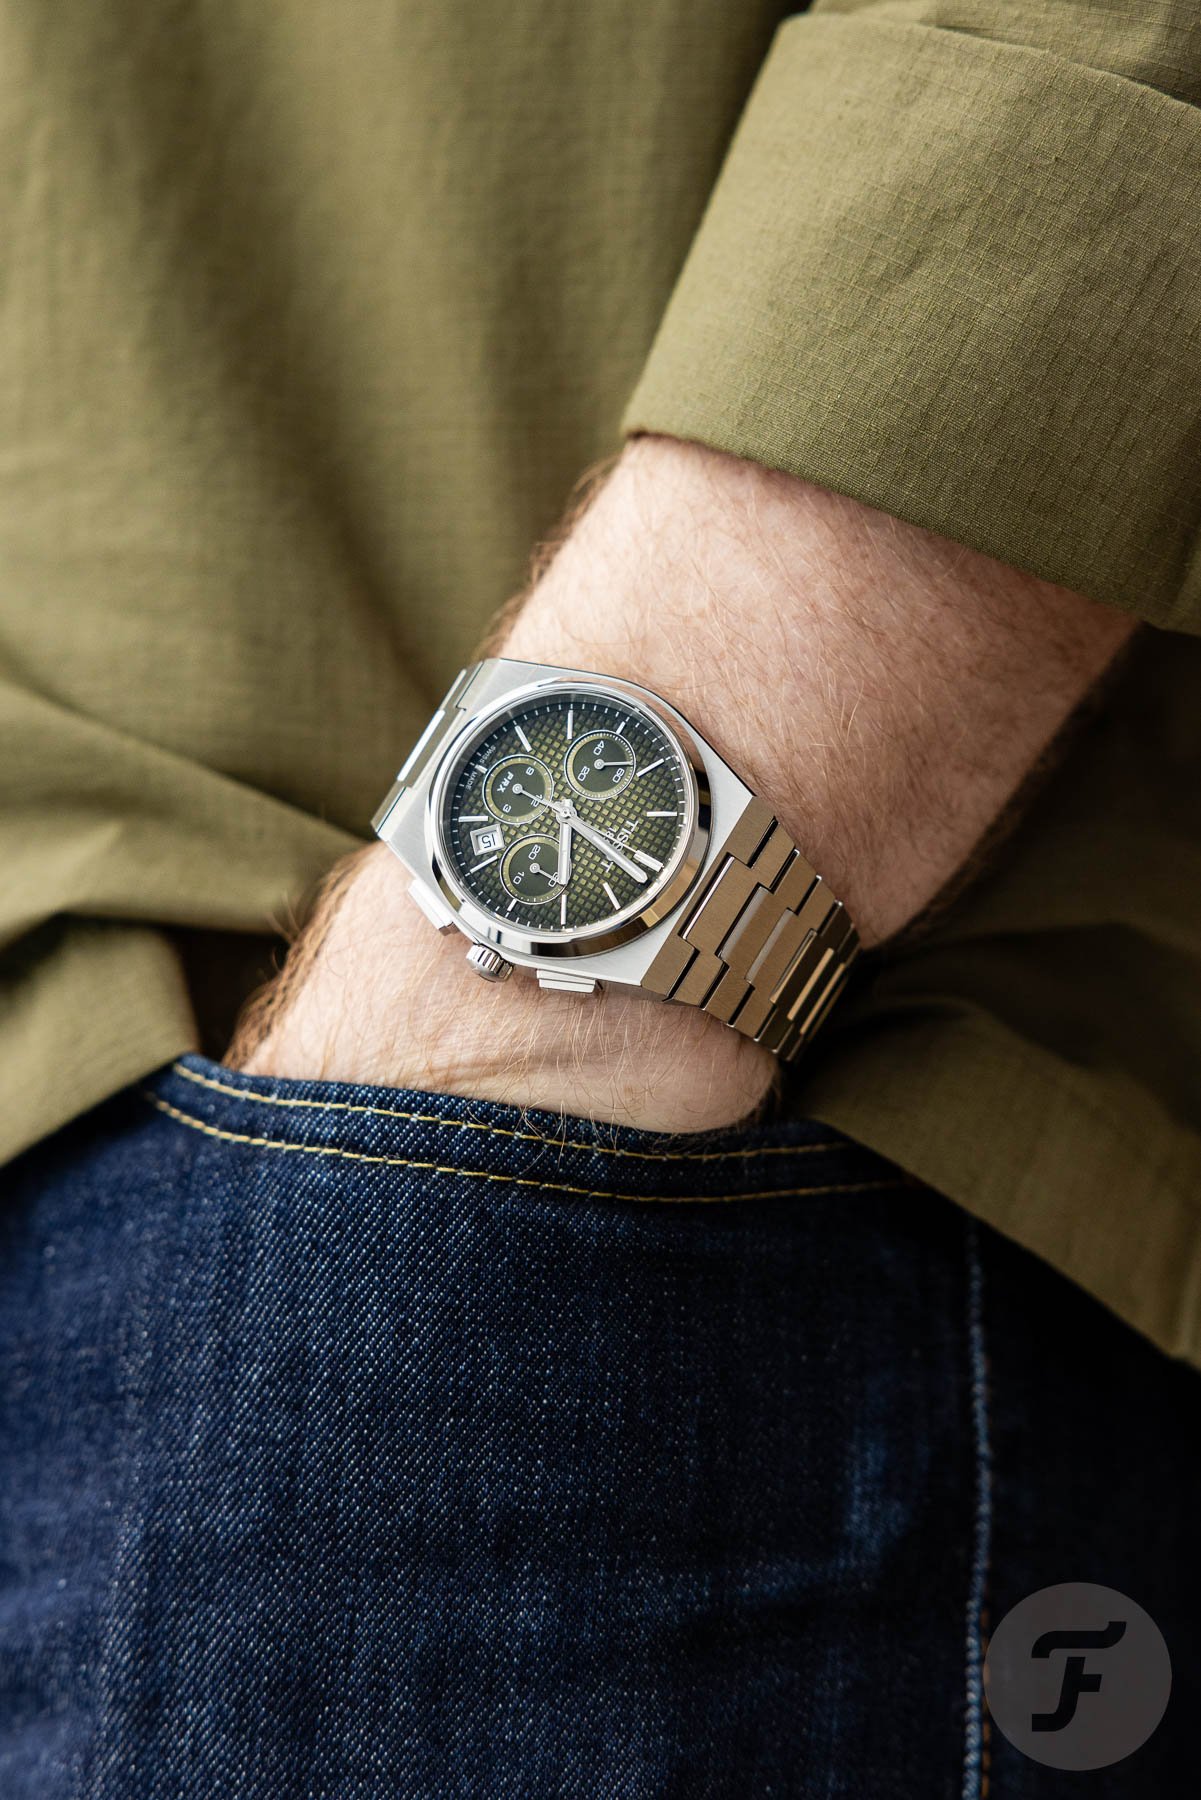 The King Seiko Collection Debuts With Incredibly Wearable Watches